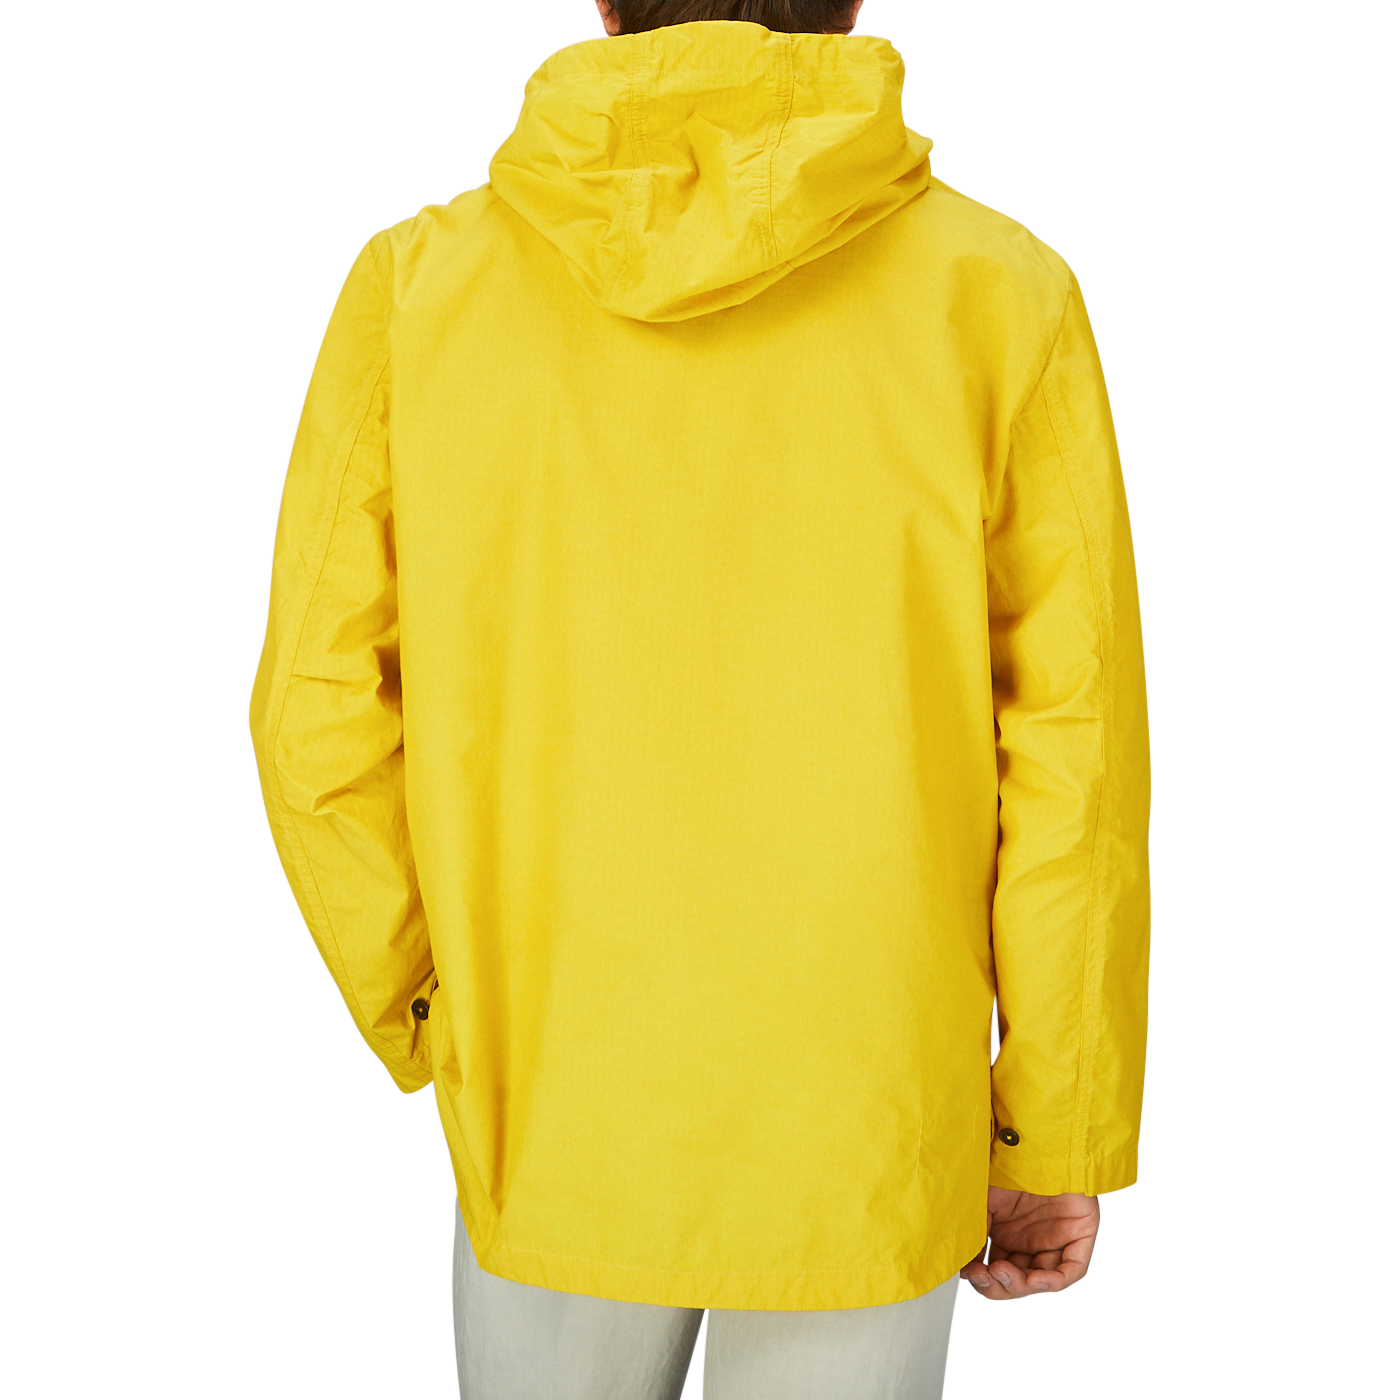 The back view of a man wearing a water-resistant Universal Works Yellow Cotton Ripstop Stanedge Jacket.